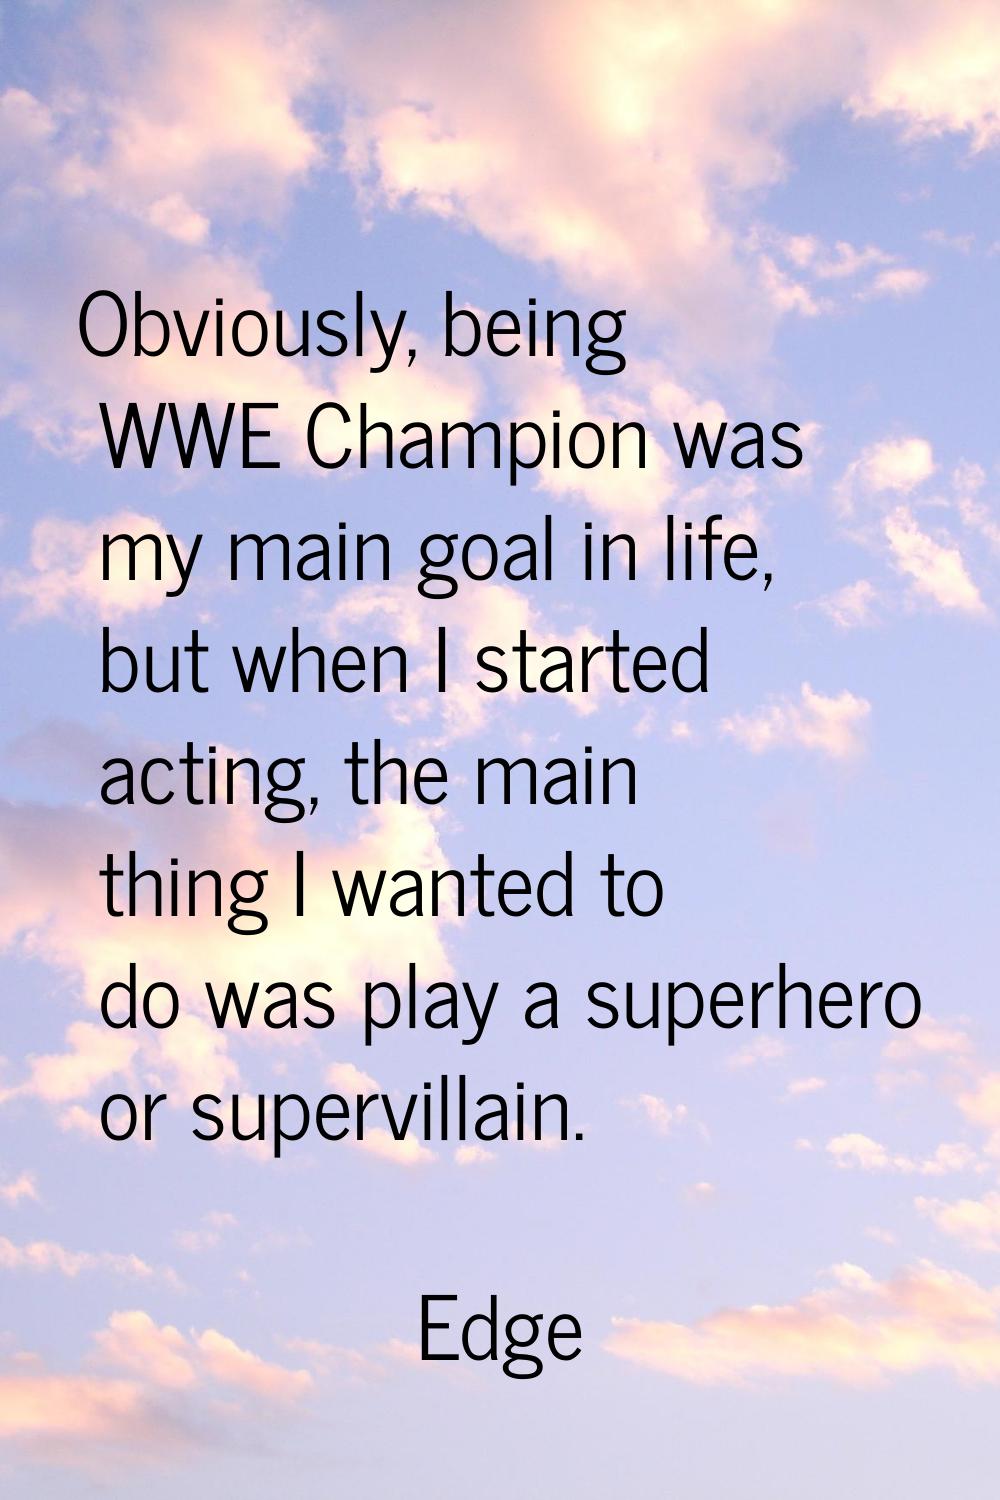 Obviously, being WWE Champion was my main goal in life, but when I started acting, the main thing I